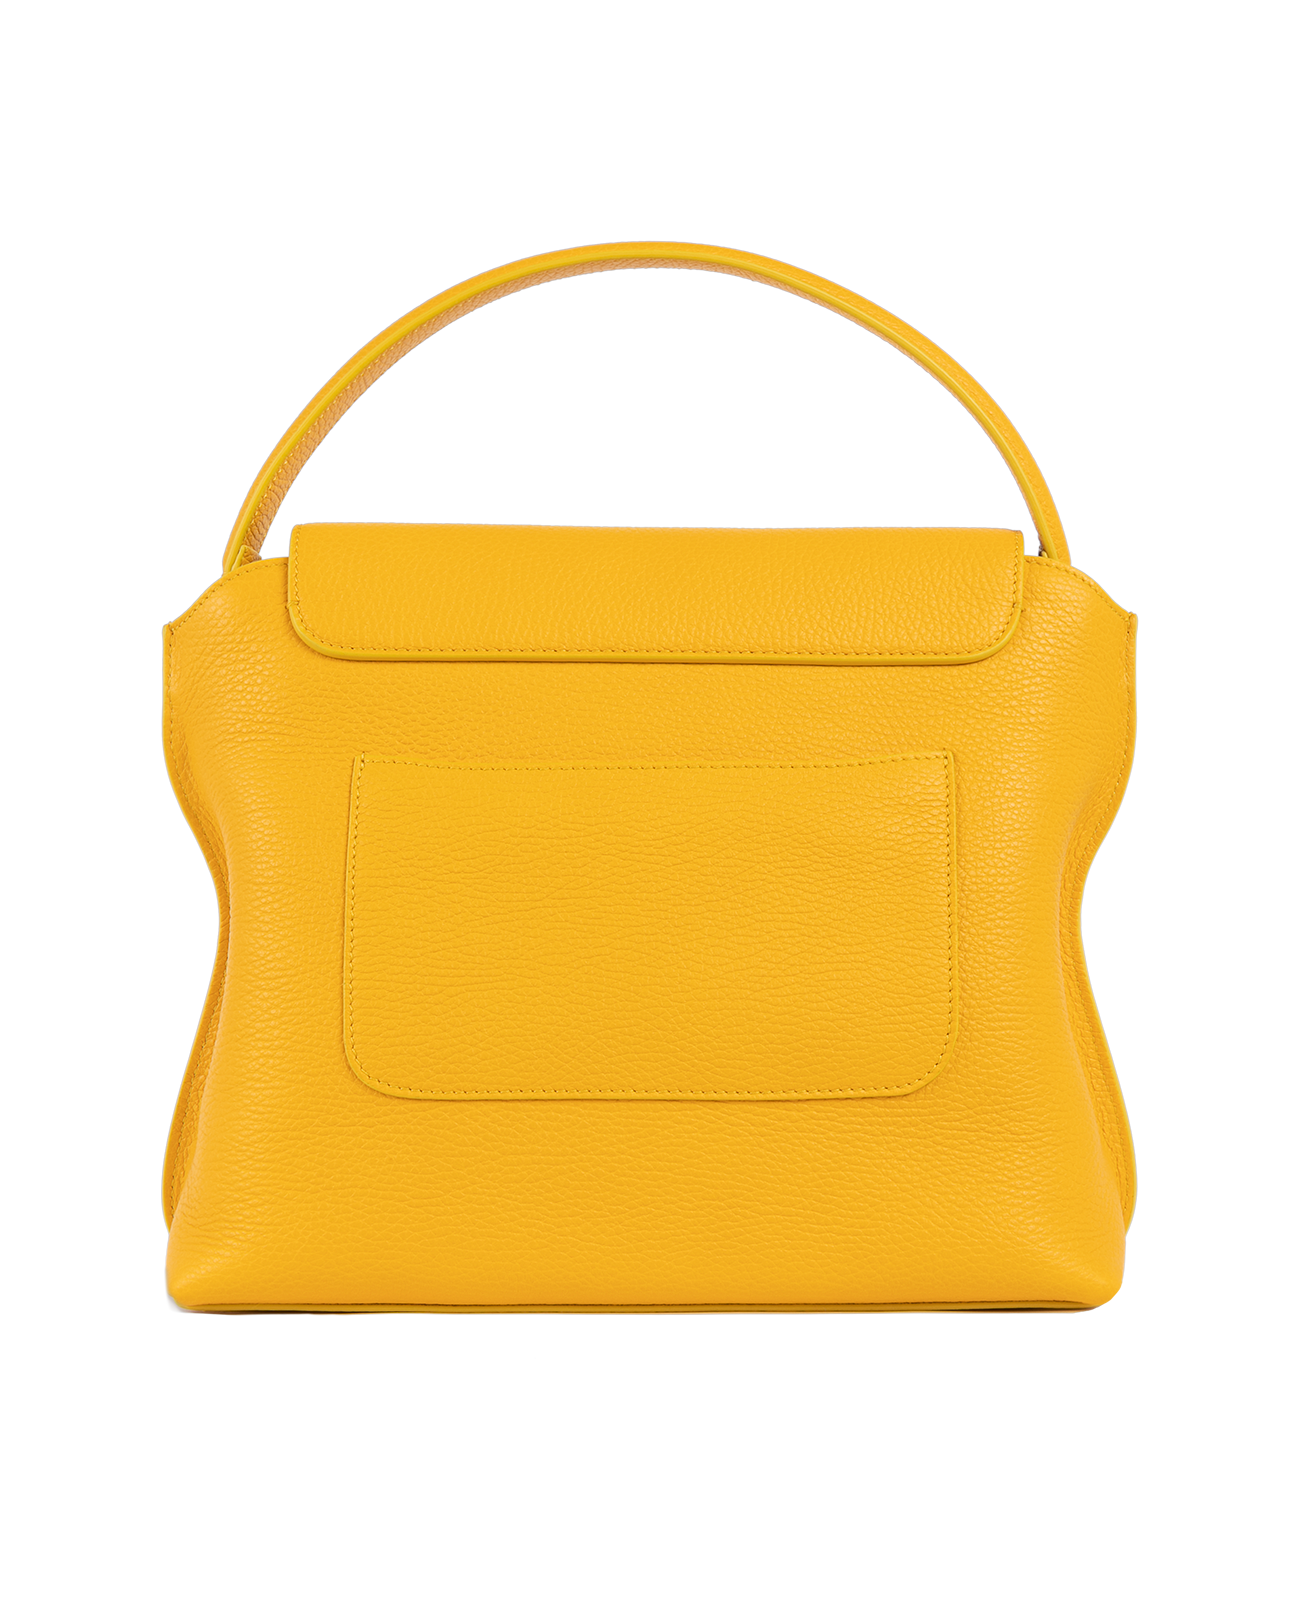 Cross-body bag in Italian full-grain leather, semi-aniline calf Italian leather with detachable shoulder strap.Three compartments, zip pocket in the back compartment. Magnetic flap closure with logo. Color: Yellow. Size:Large